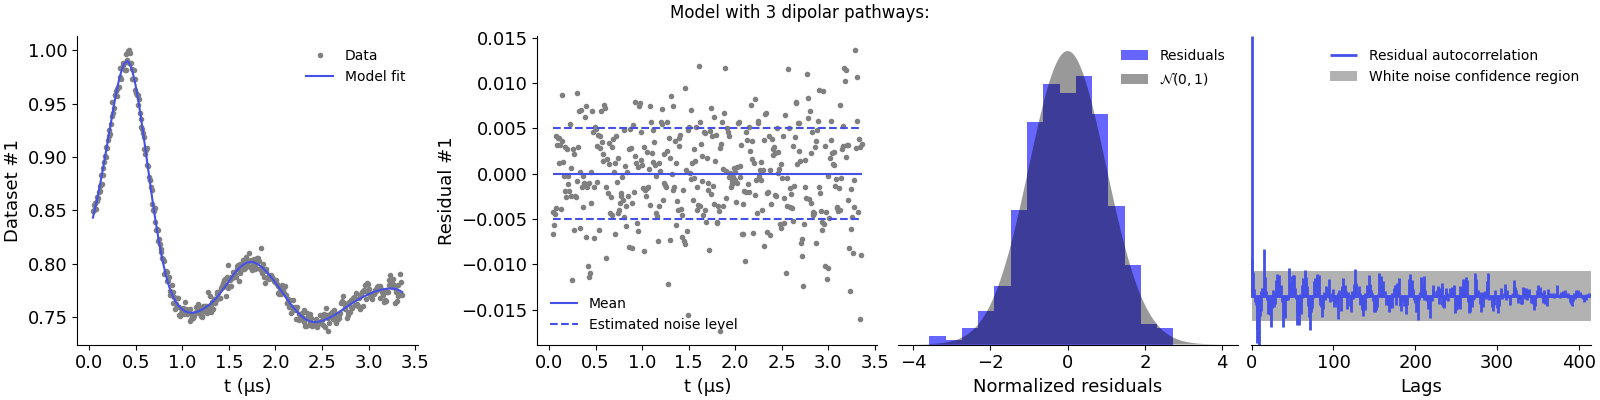 Model with 3 dipolar pathways: